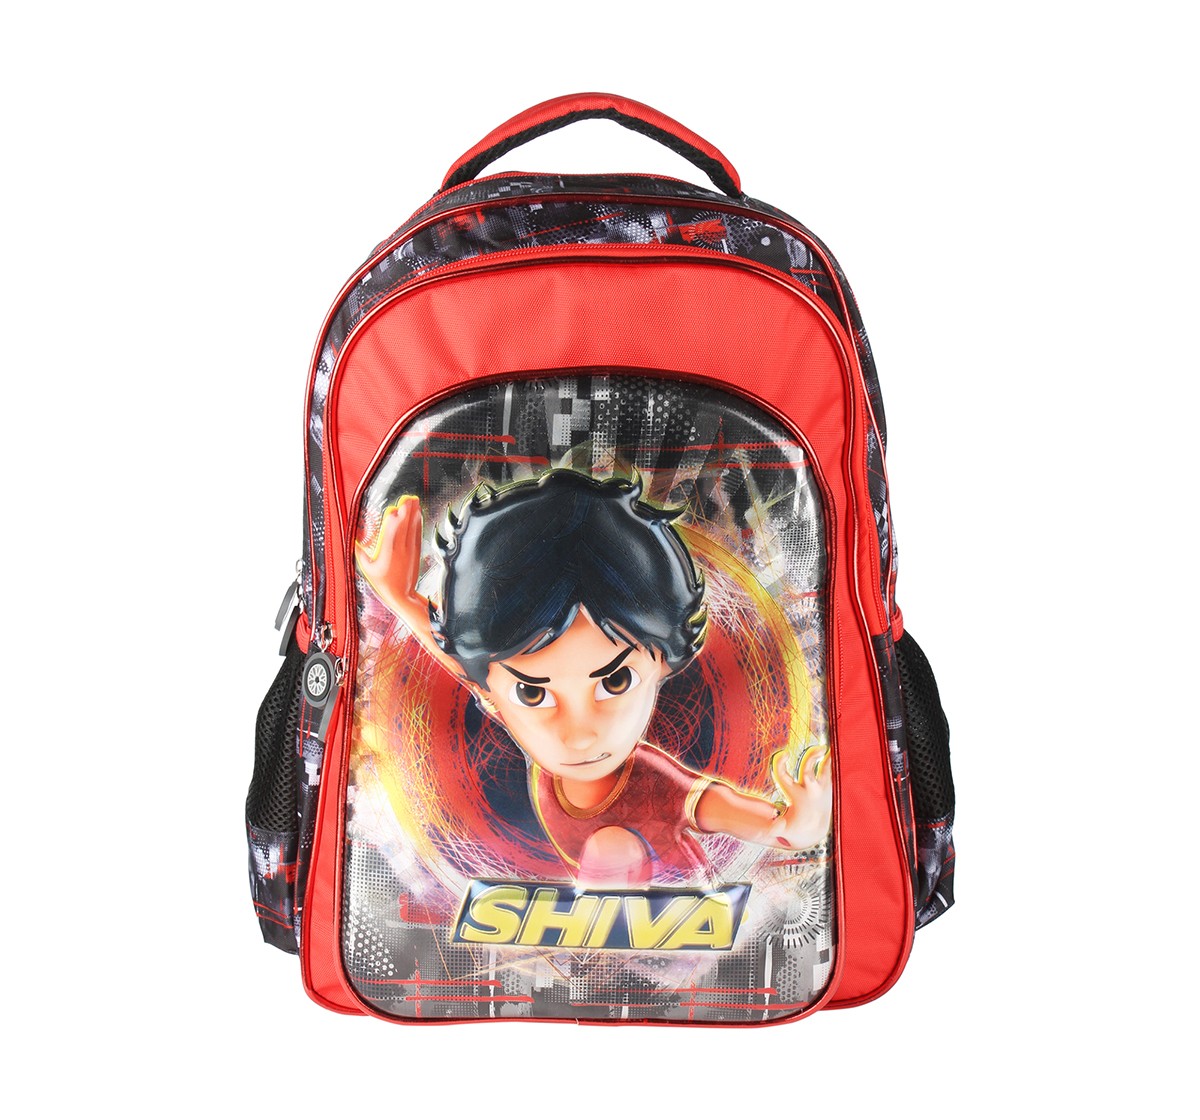  Shiva The Powerful Backpack- 16" Bags for Kids age 5Y+ (Red)